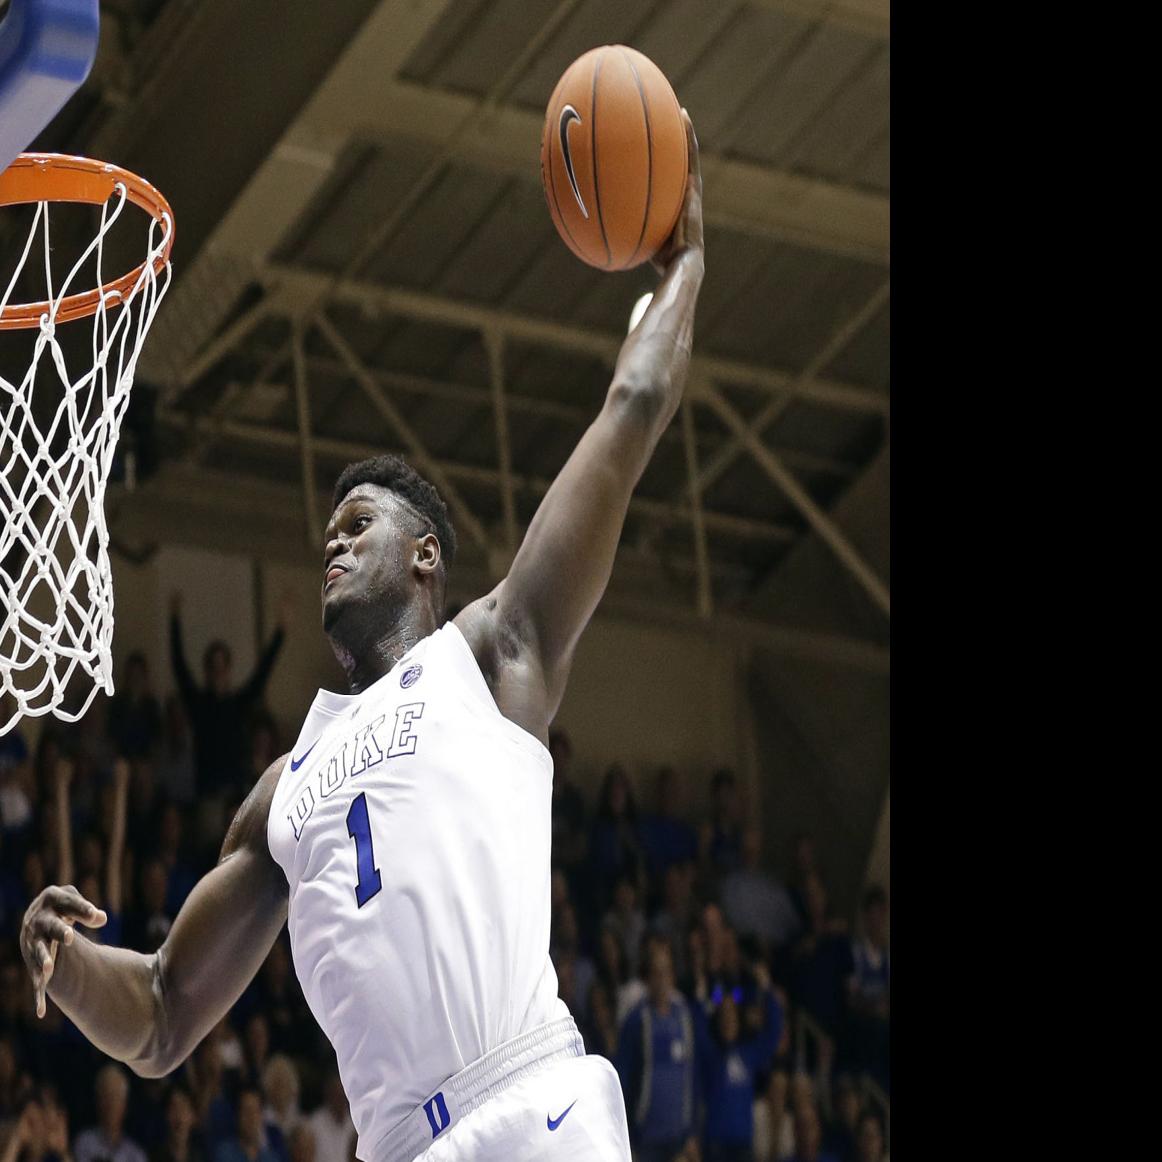 NBA Draft 2019: Duke's Zion Williamson picked No. 1 by New Orleans